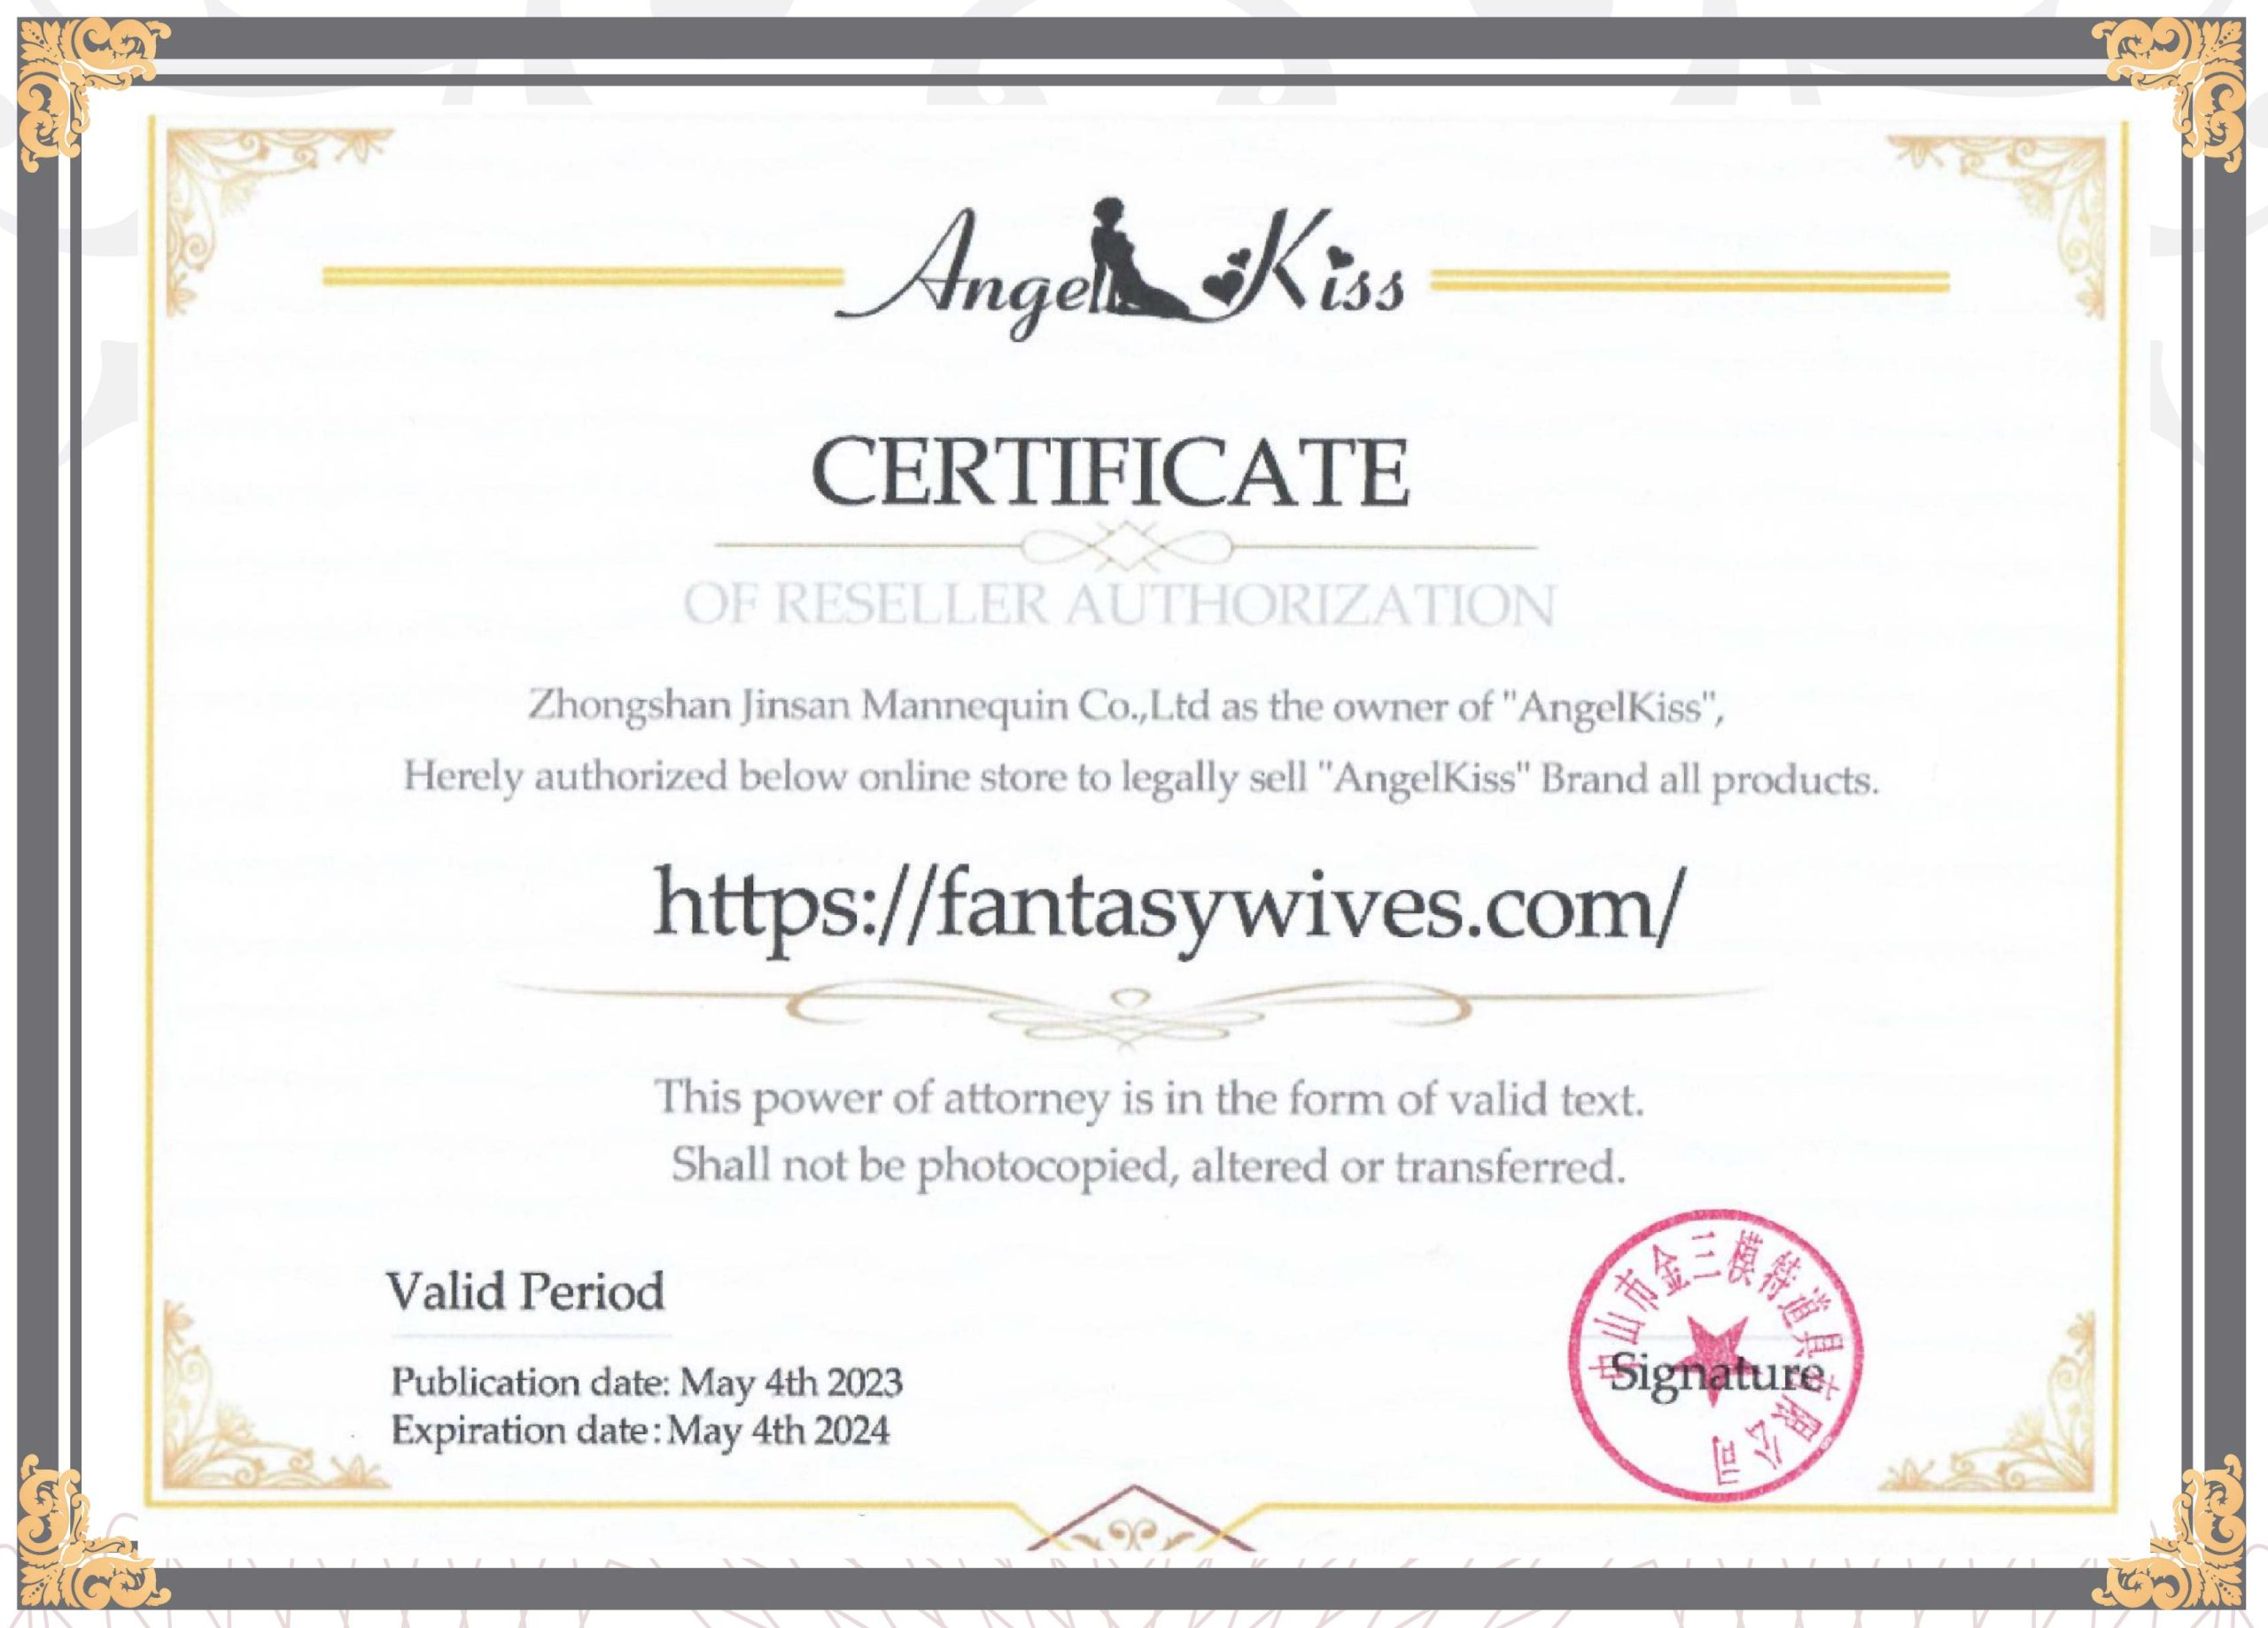 AngelKiss Certificate